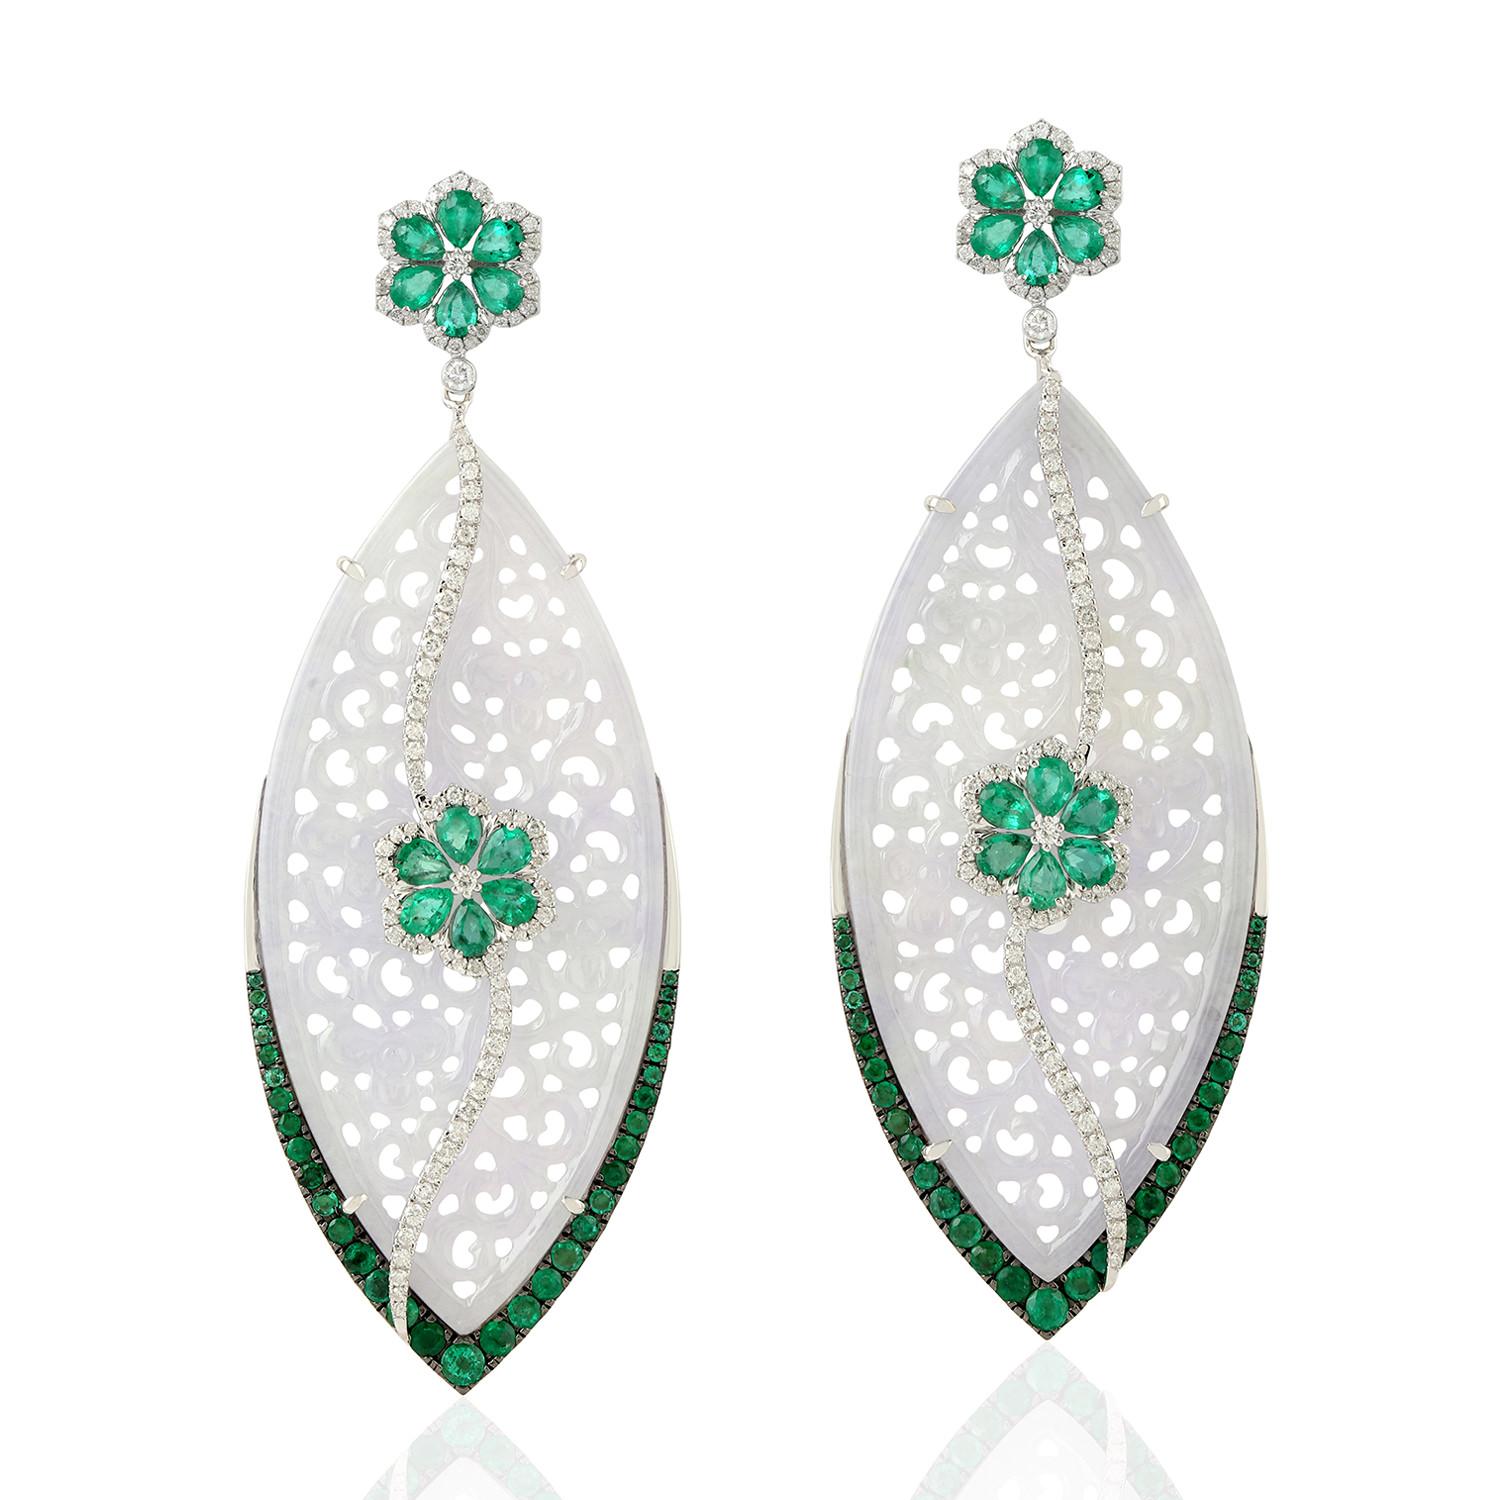 These stunning hand carved Jade earrings are thoughtfully and meticulously crafted in 18-karat white gold. It is set in 26.04 carats Jade, 1.99 carats emerald and 2.79 carats of sparkling diamonds.

FOLLOW  MEGHNA JEWELS storefront to view the